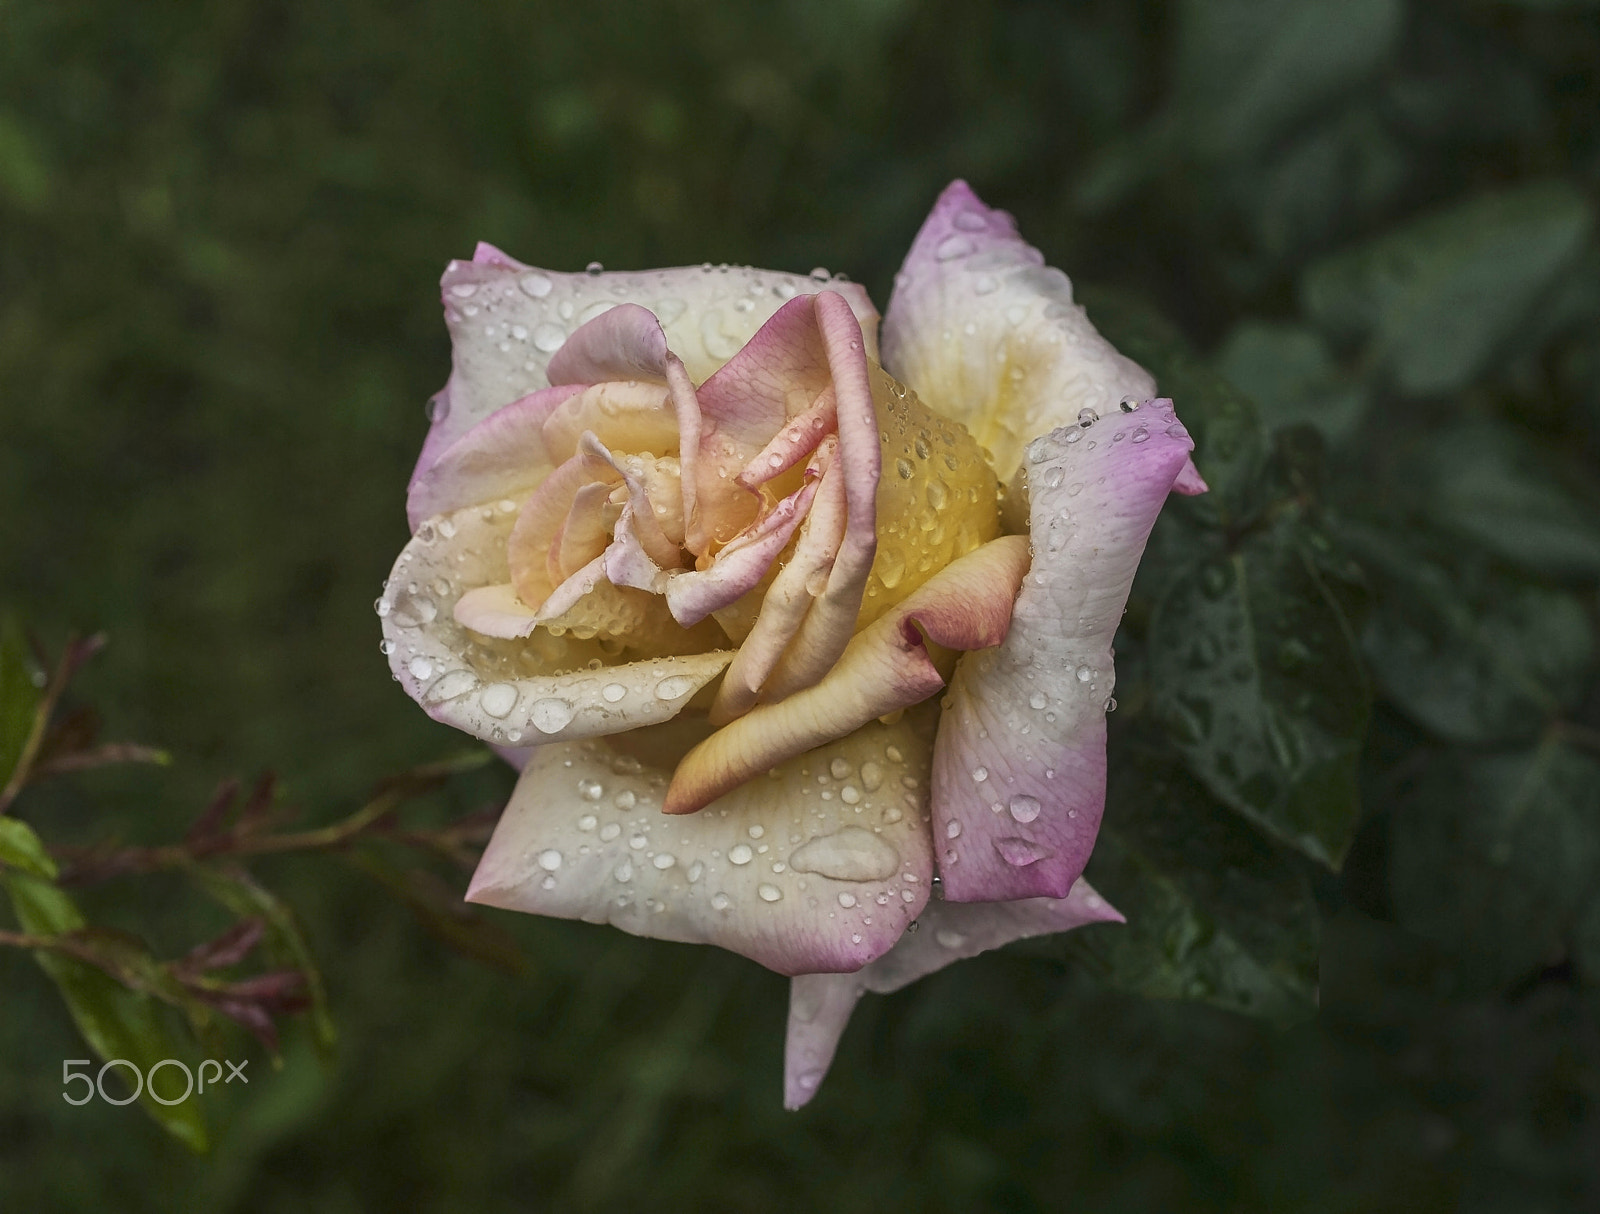 Nikon D200 + AF Micro-Nikkor 55mm f/2.8 sample photo. After the rain... photography